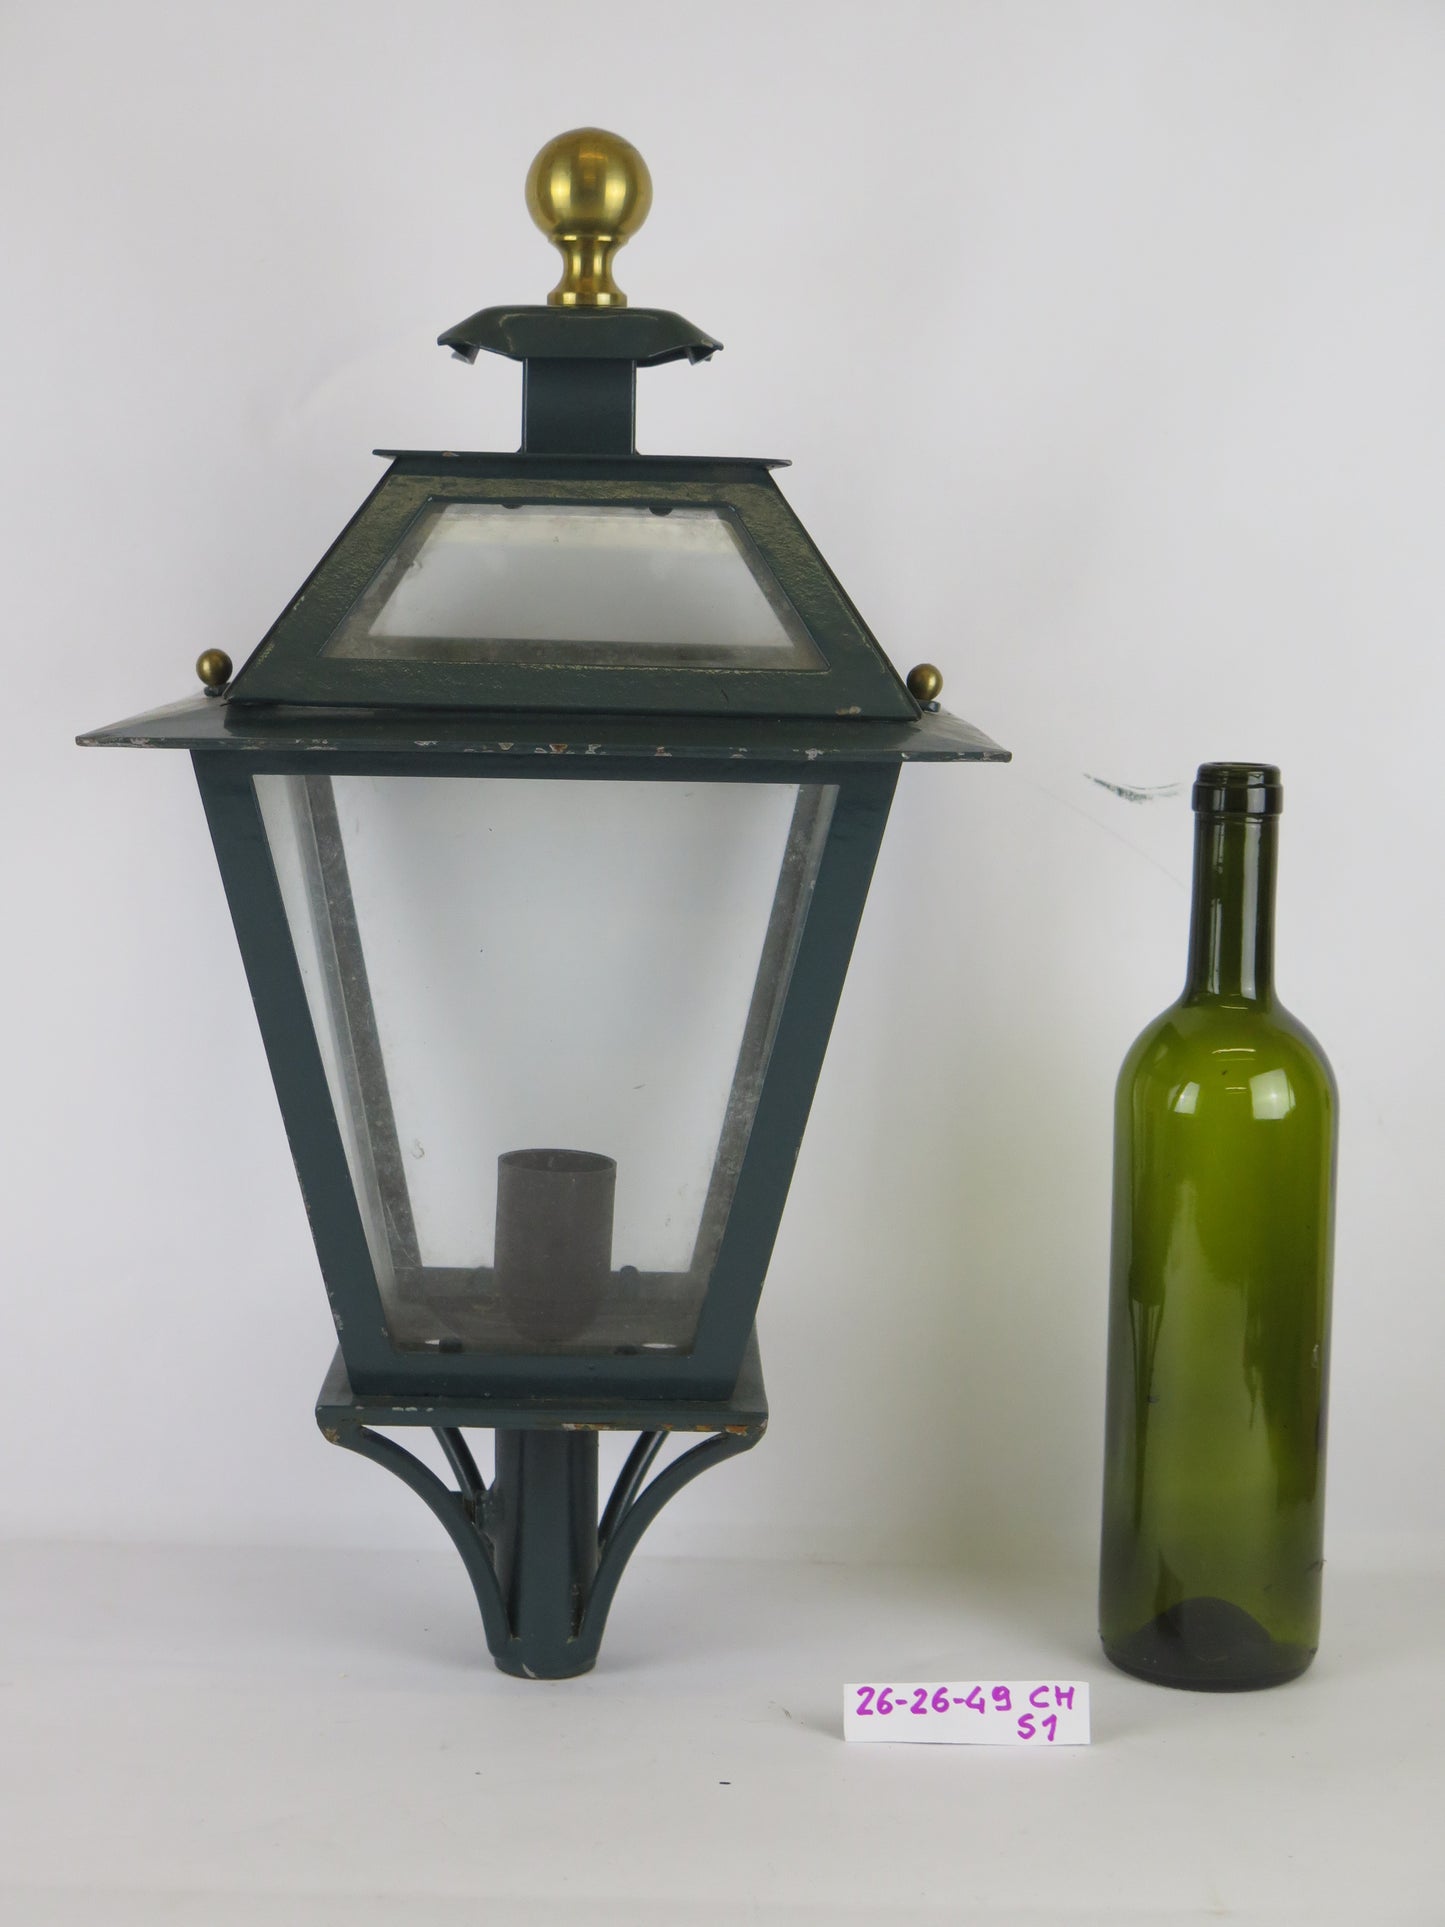 Wrought iron lamppost with vintage wall bracket high quality Italian Chandelier Lantern CH S1